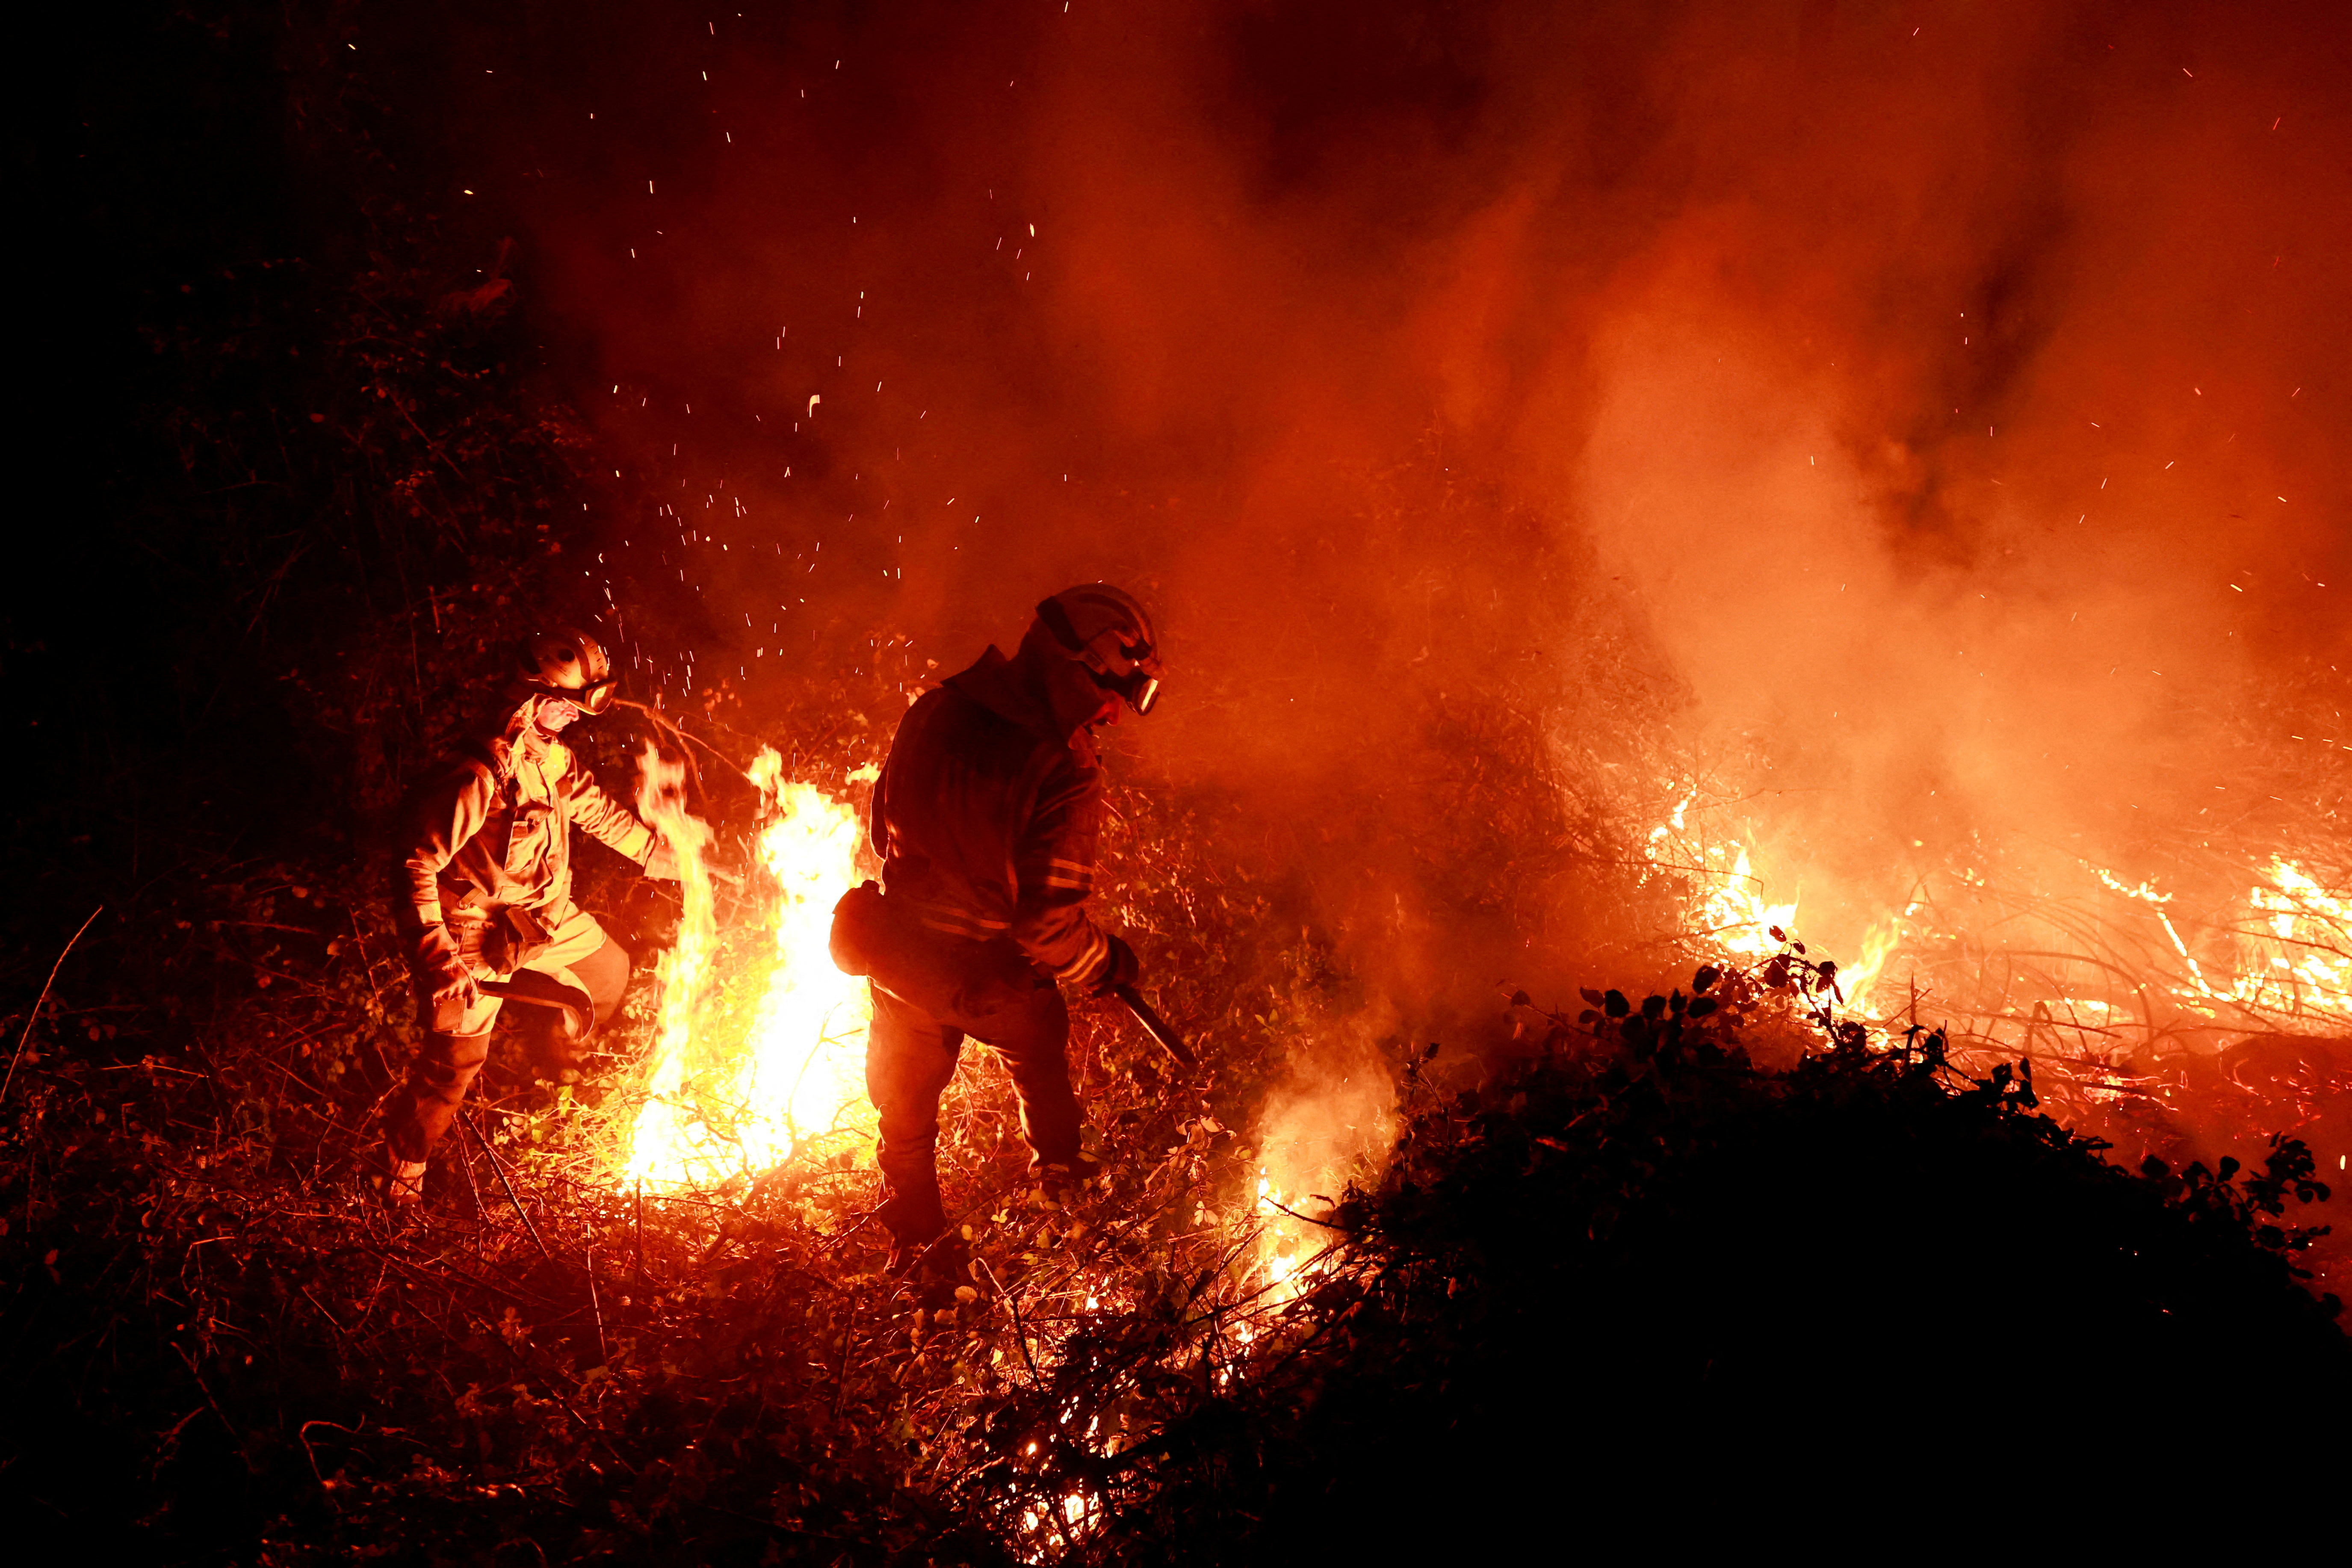 Galician firefighters tackle flames in a forest during an outbreak of wildfires following a prolonged period of drought and unusually high temperatures, in Piedrafita, Asturias, Spain./Reuters/Vincent West.
